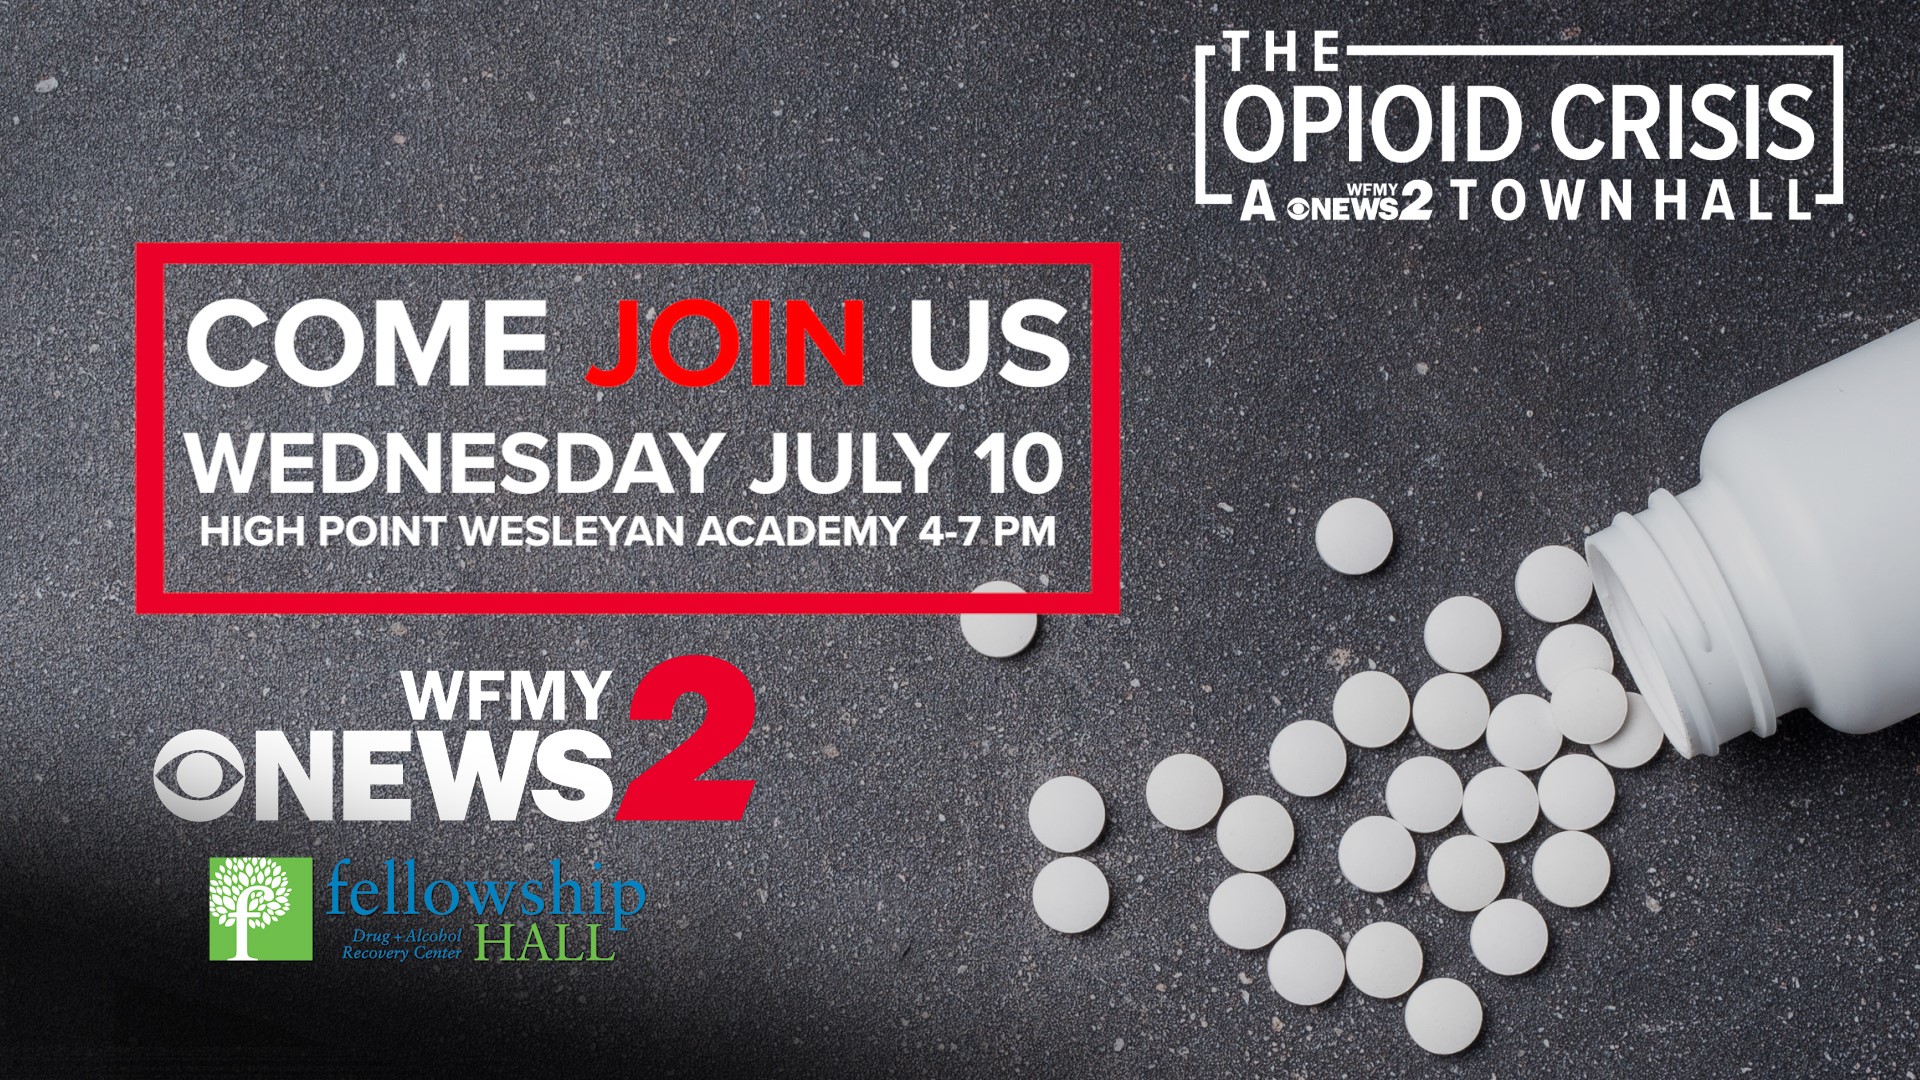 Every day, nearly 5 North Carolinians die from a medication or drug overdose. WFMY News 2 wants to be part of the solution, by working with the NC Attorney General to host a community discussion about the problem. It’s Wednesday, July 10 at Wesleyan Academy in High Point. Doors open at 4p.